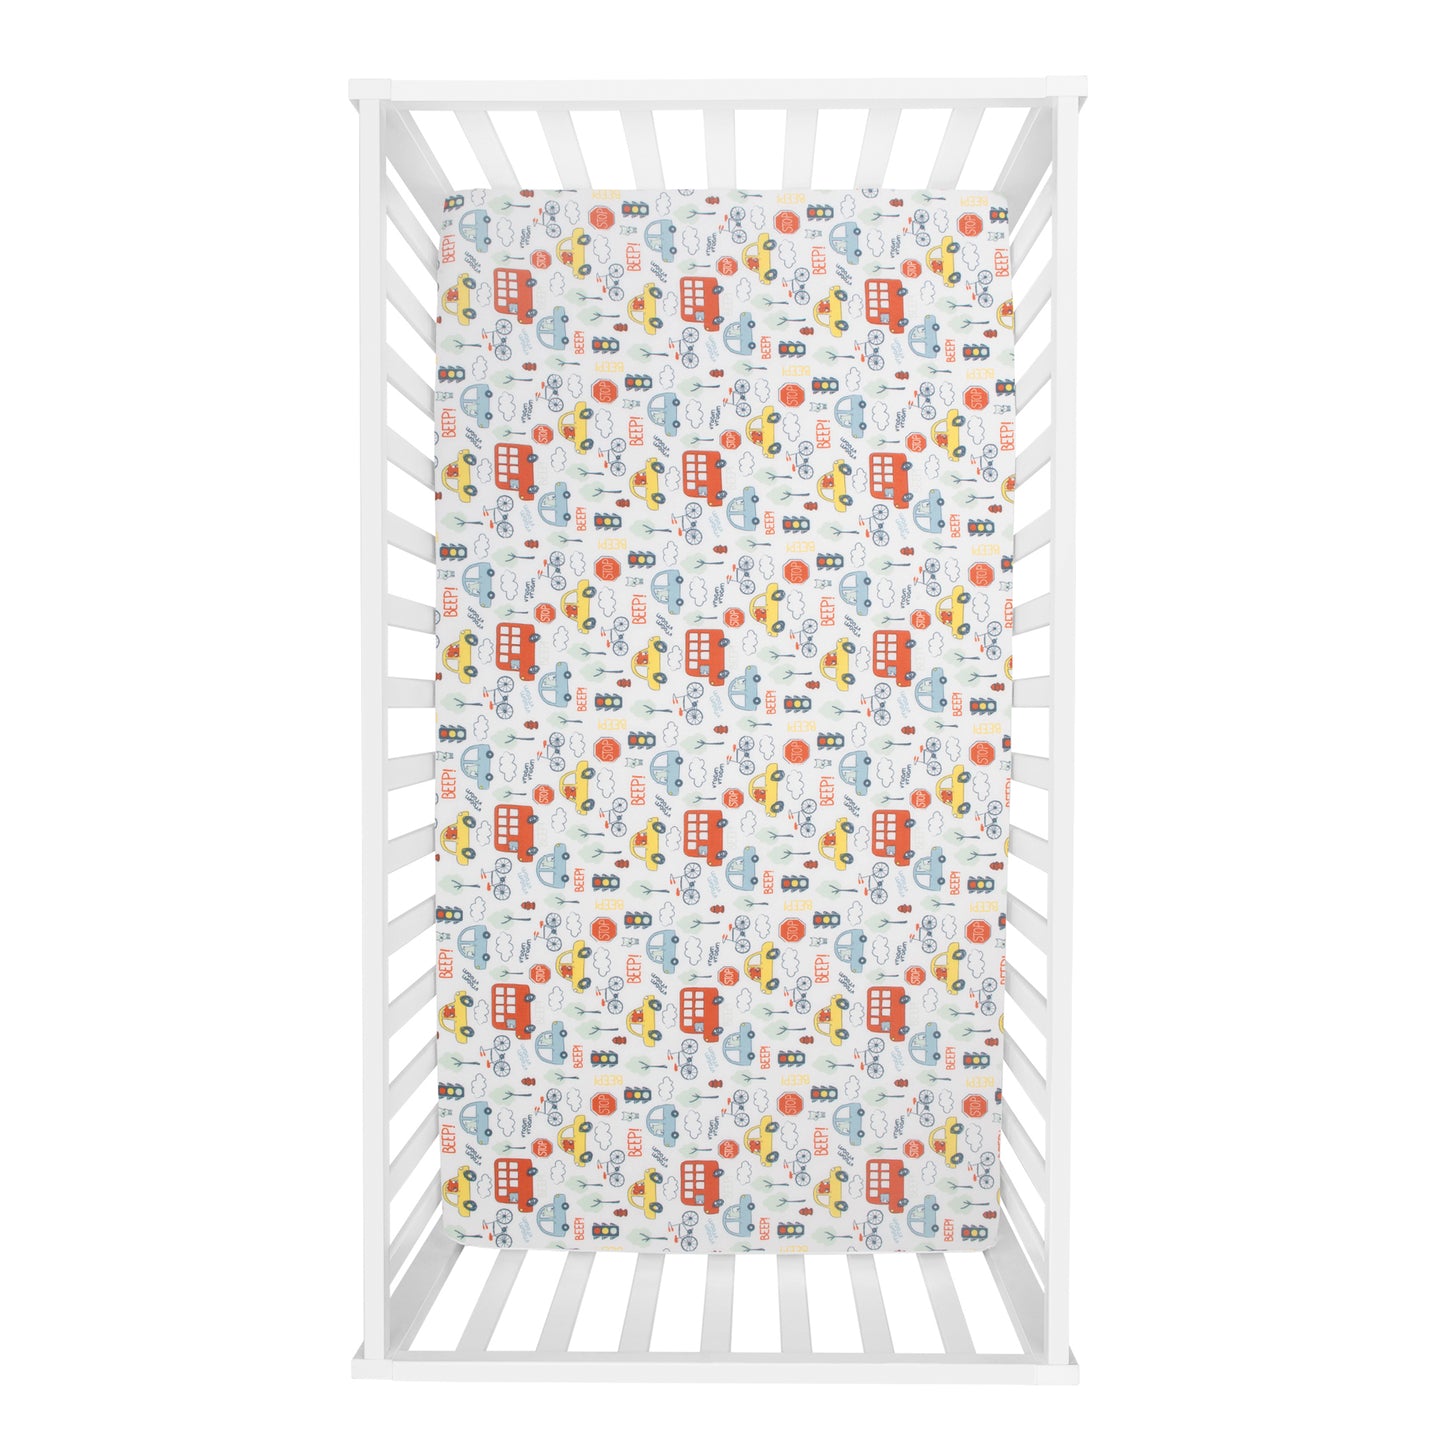  Beep Beep 4 Piece Bedding Set by Sammy and Lou- overhead view of crib sheet